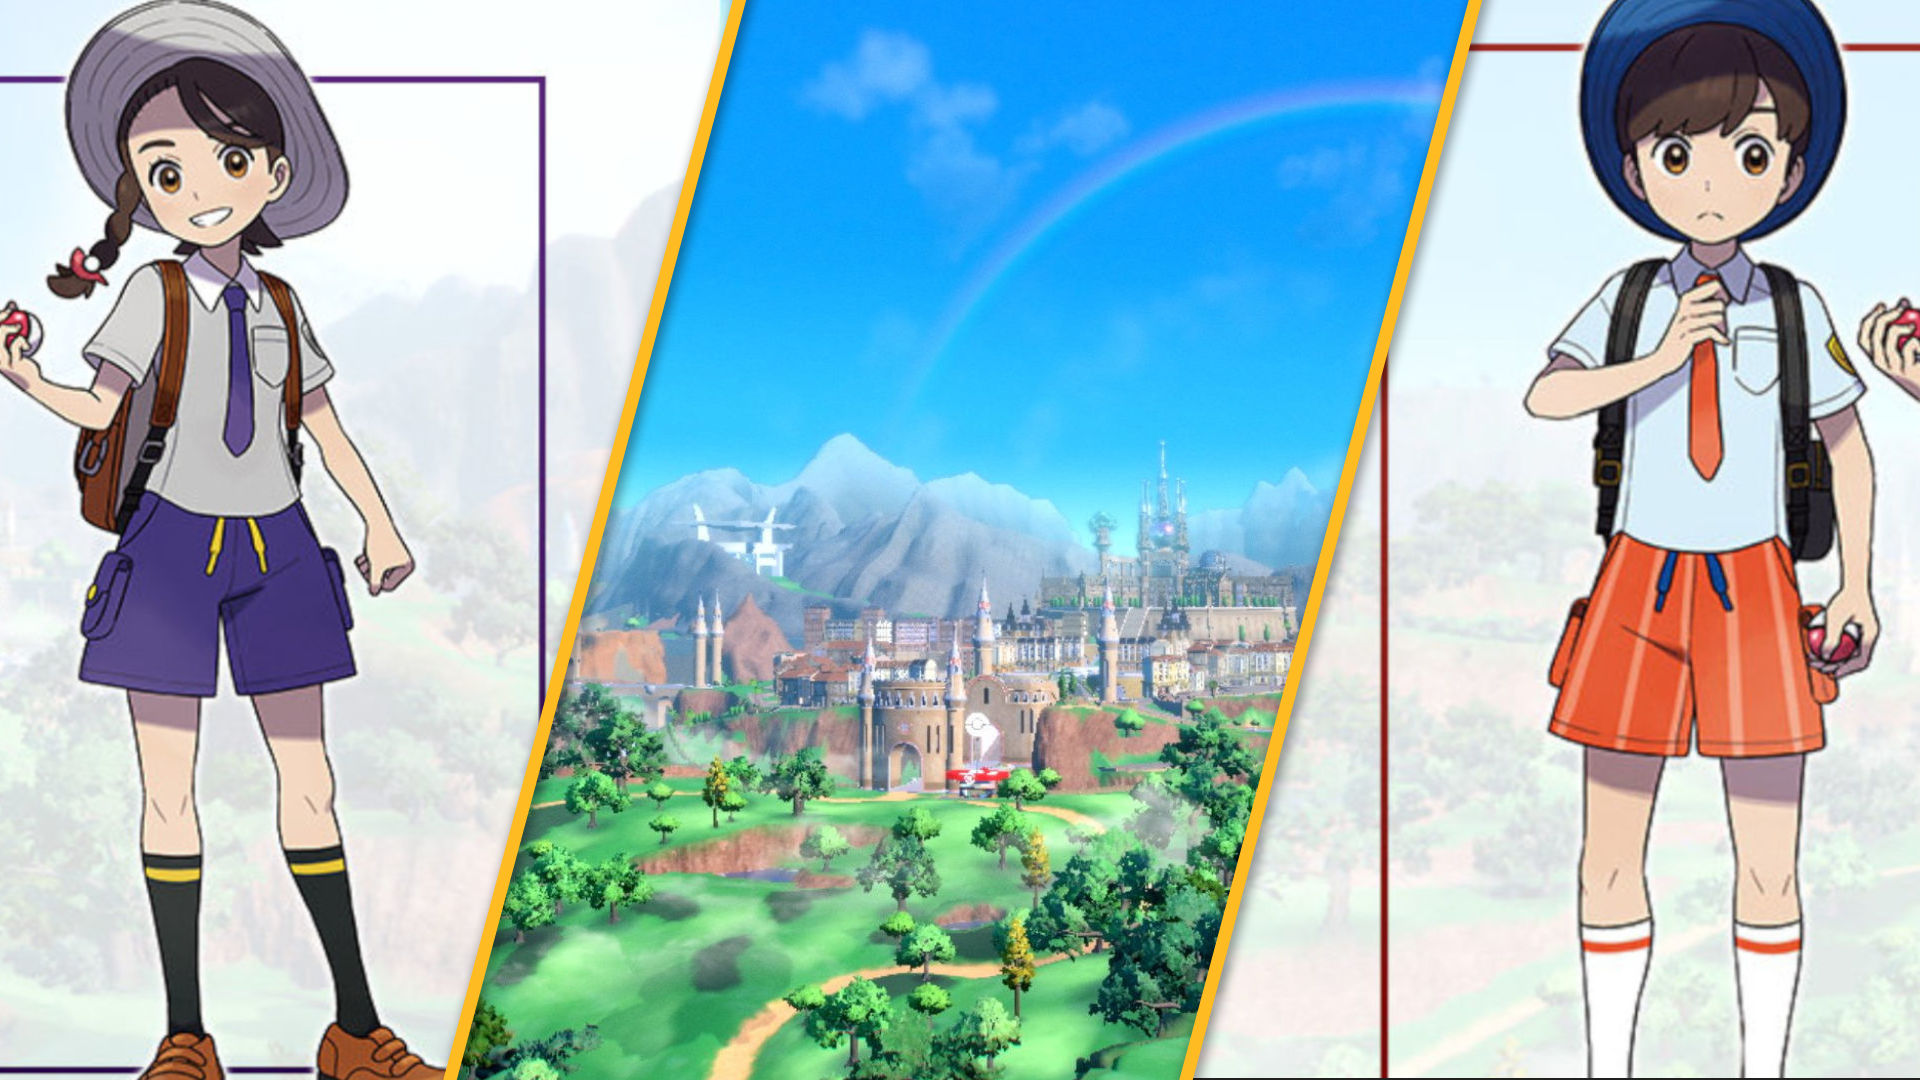 What are the differences between Pokémon Scarlet and Pokémon Violet?